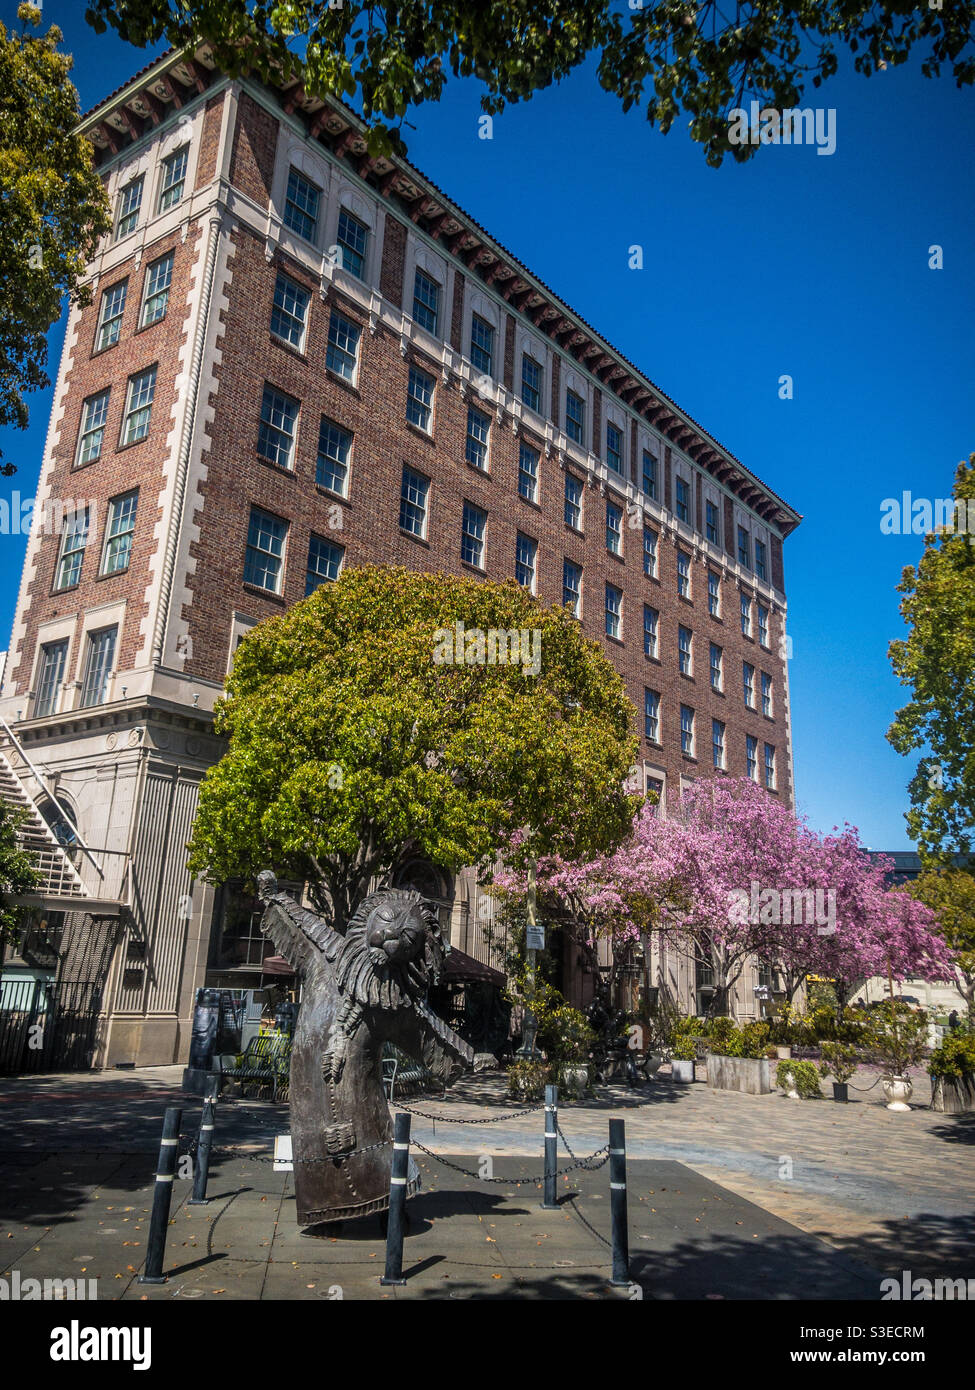 Culver Hotel in Culver city California with Leo the lion standing guard Stock Photo